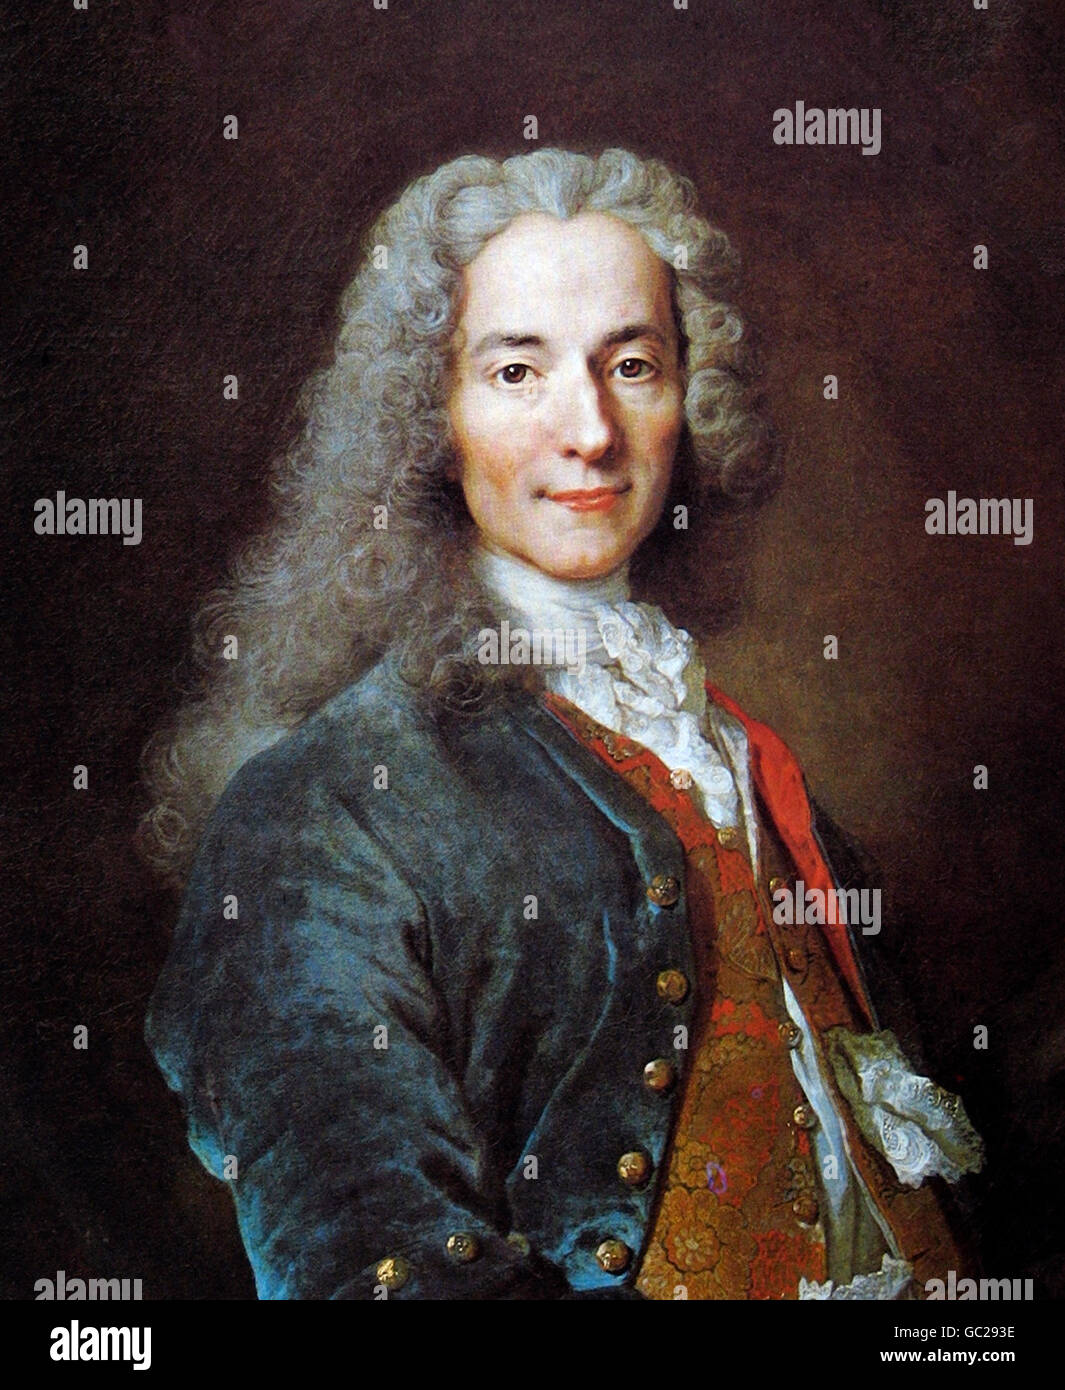 Voltaire. Portrait of the French Enlightenment writer and philosopher ...